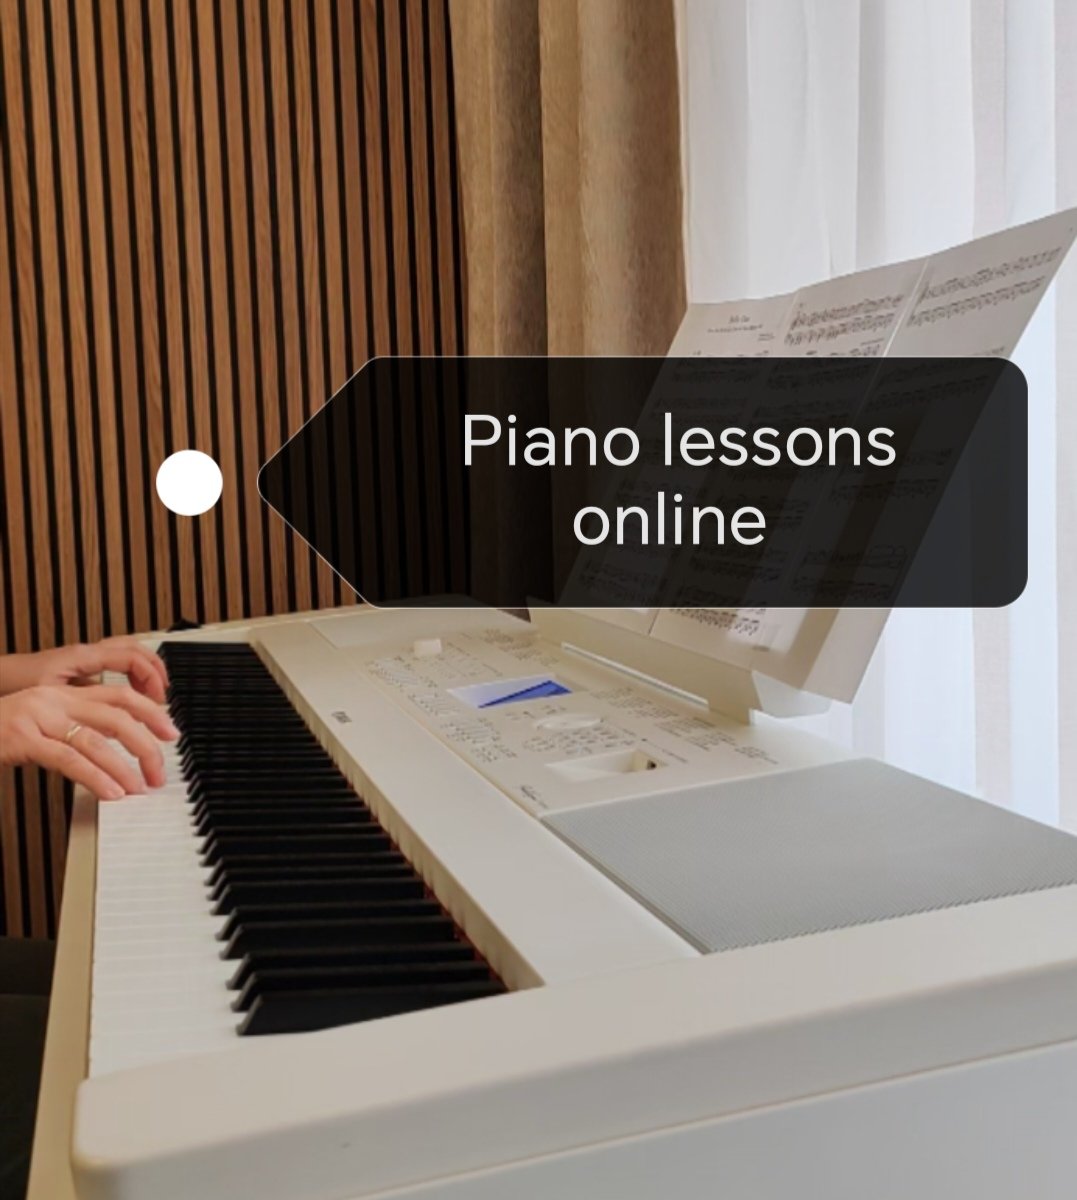 Hello everyone! You already know that I'm a #pianoteacher and #pianoarranger. 🎹
I #teachpiano to students aged 12+ in Russian, Polish and English. At this time, I can take 2 more students for individual #pianolessonsonline 💻 You can ask me all questions. 🙂
#learnpiano #piano